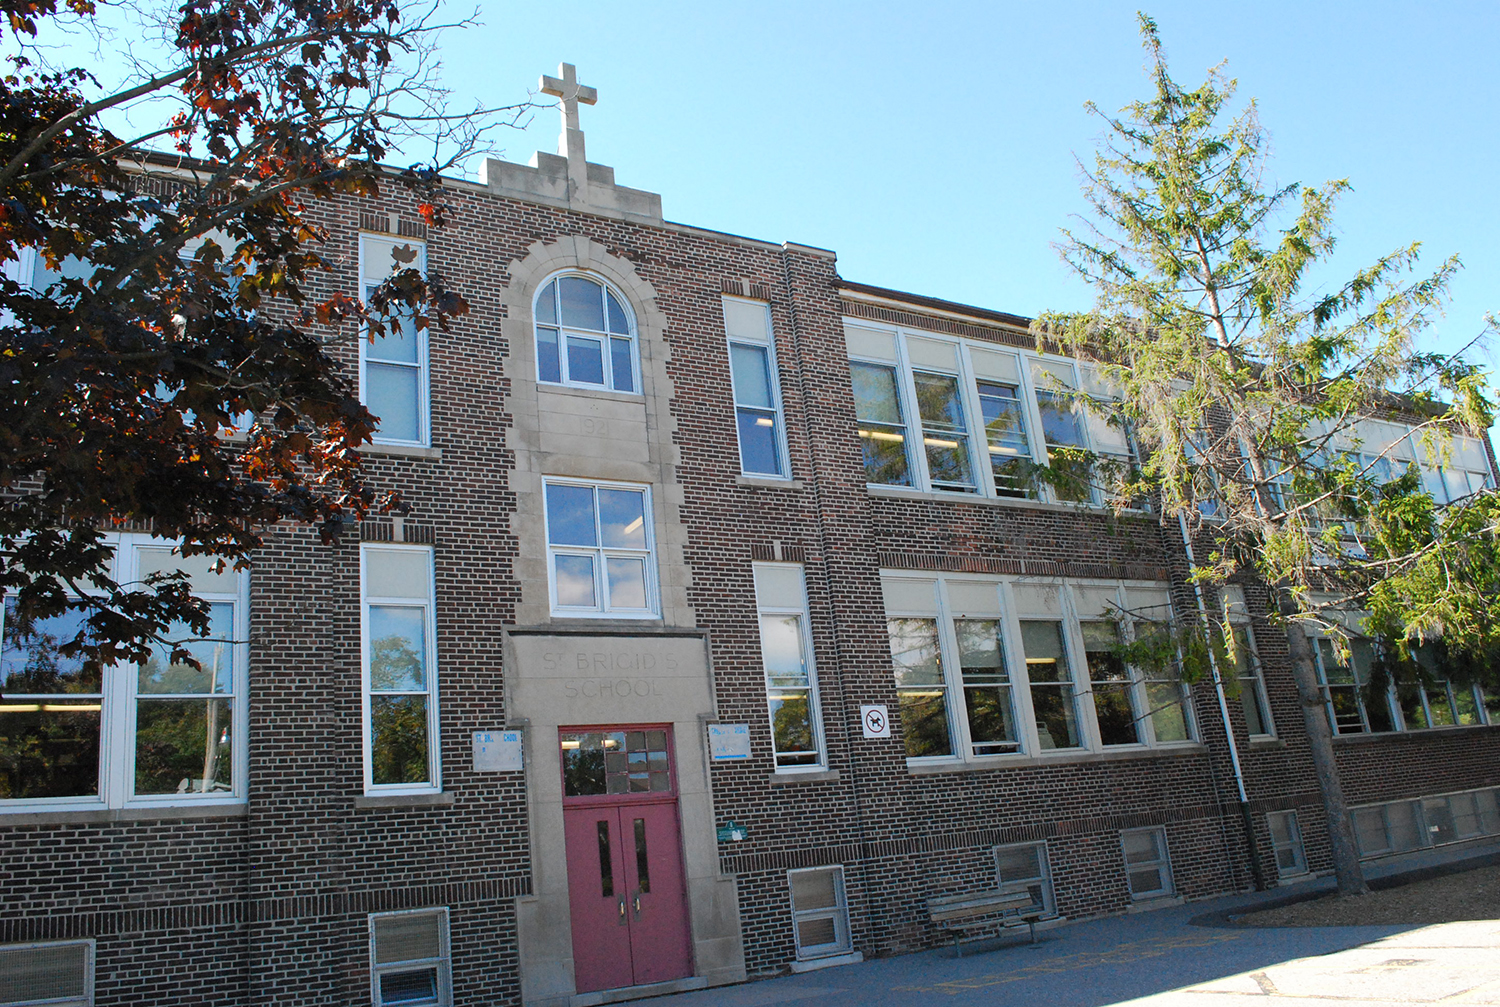 The front of the school building.